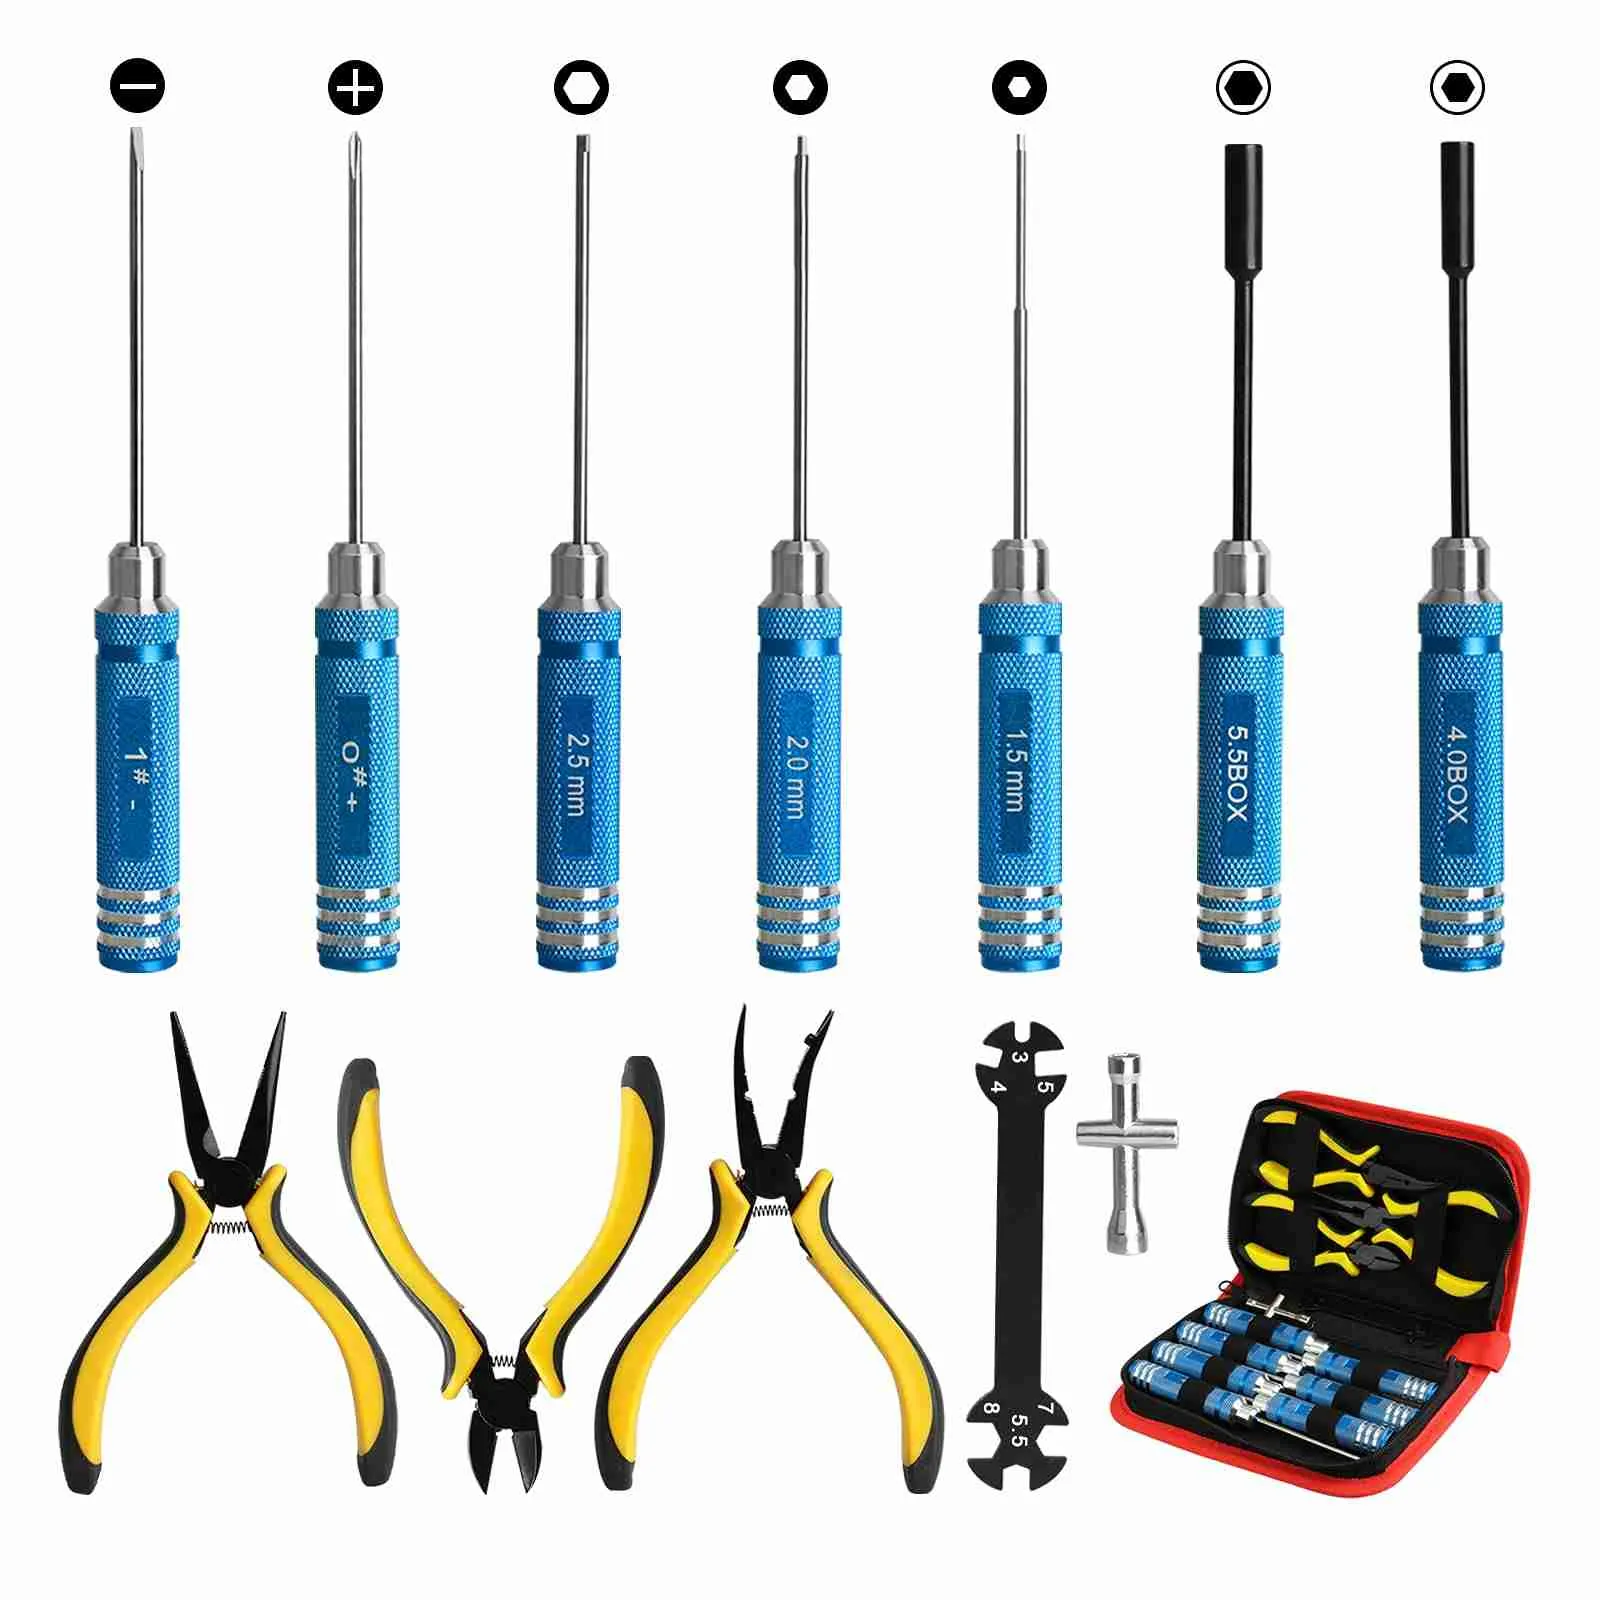 Best RC Hobby Tool Set: Top Picks for Precision and Efficiency